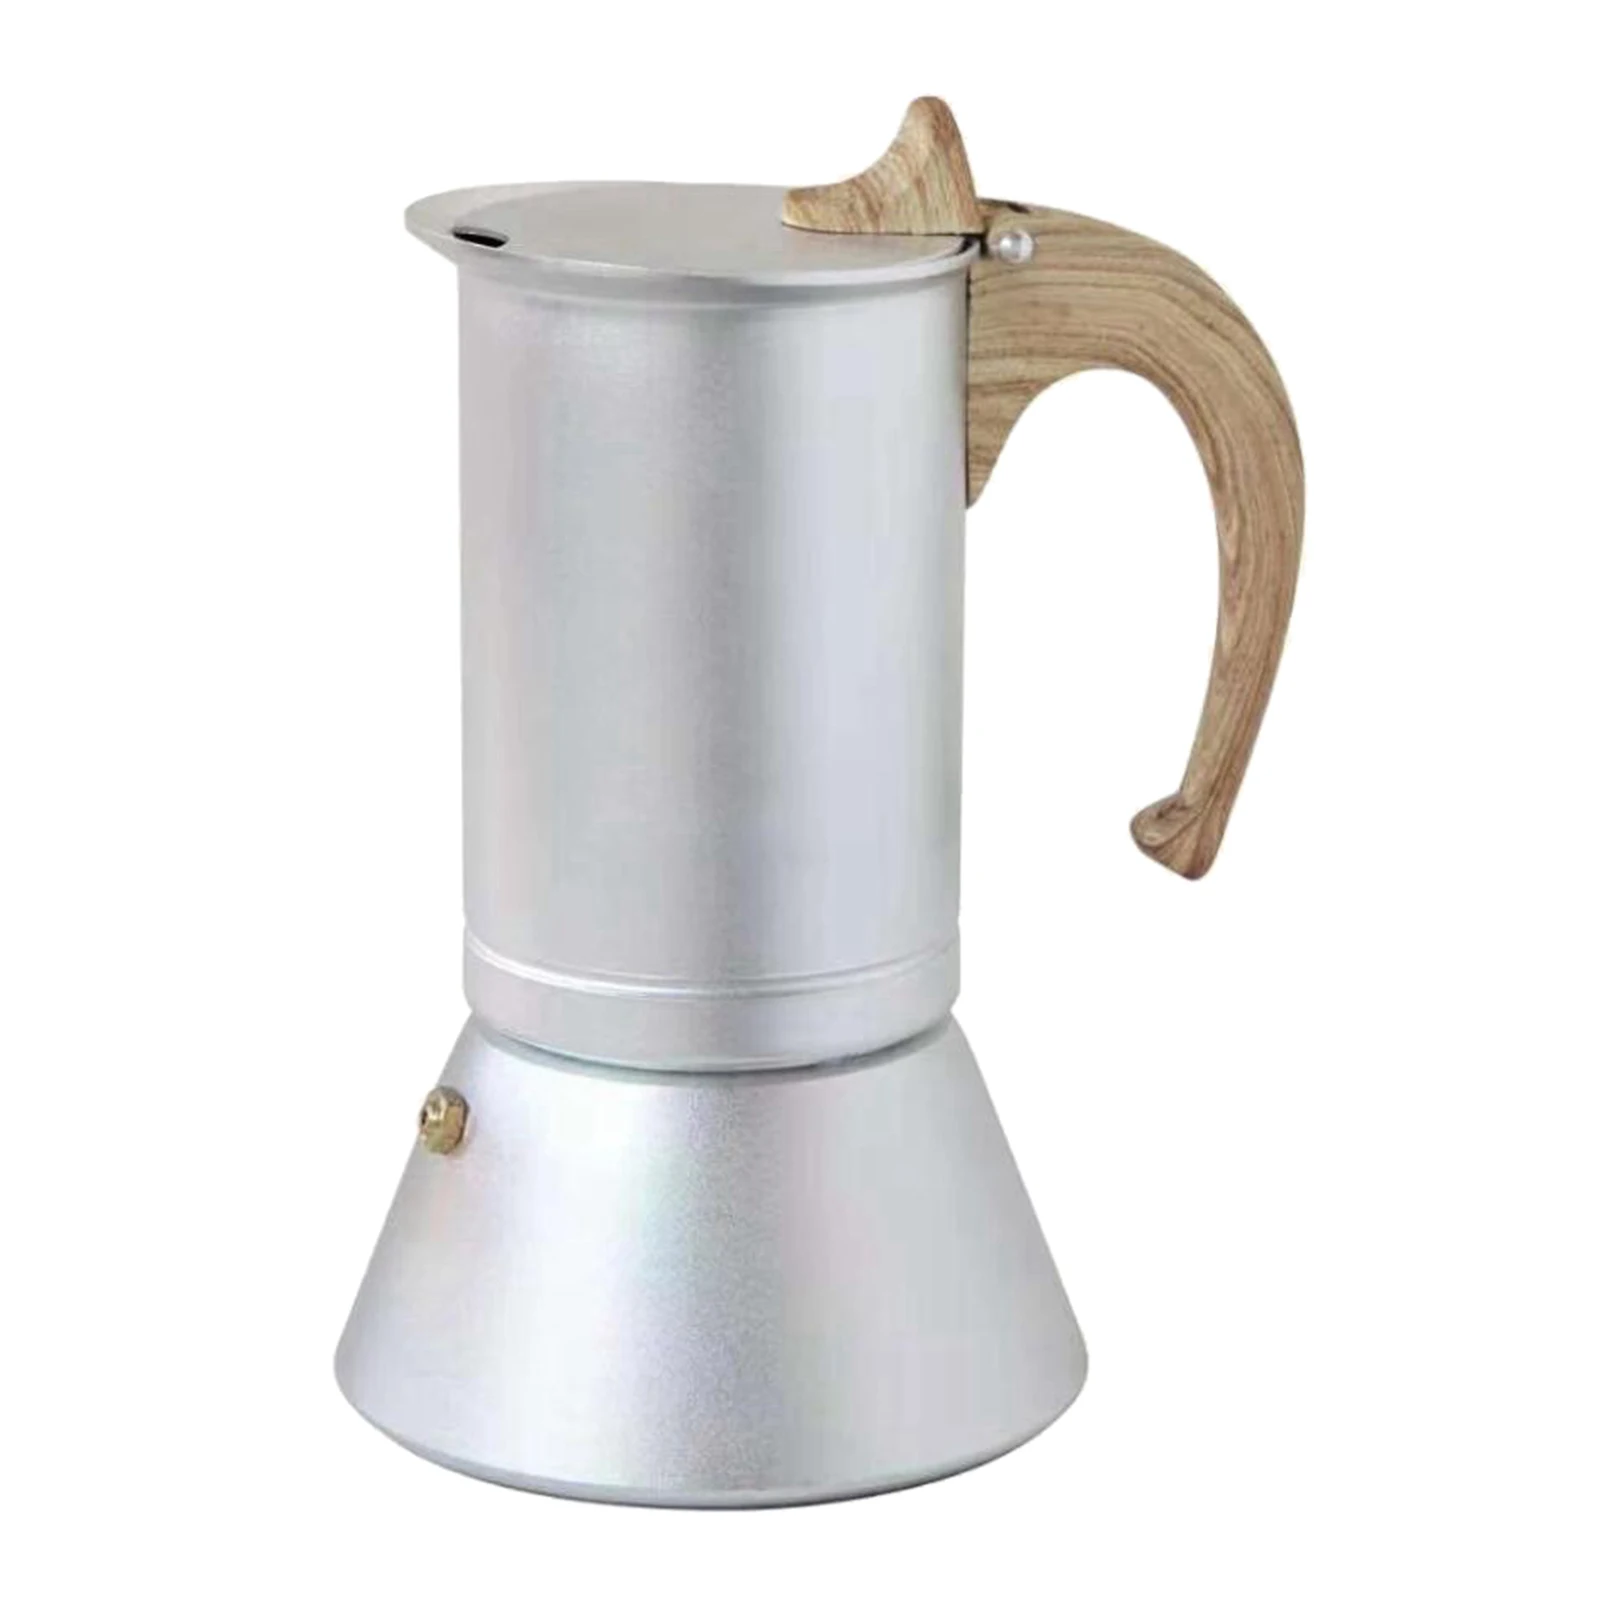 Stovetop Coffee Maker 150ml 3 Cups Aluminum Espresso Pot Coffee Maker Moka Pot with Stainless Steel Base